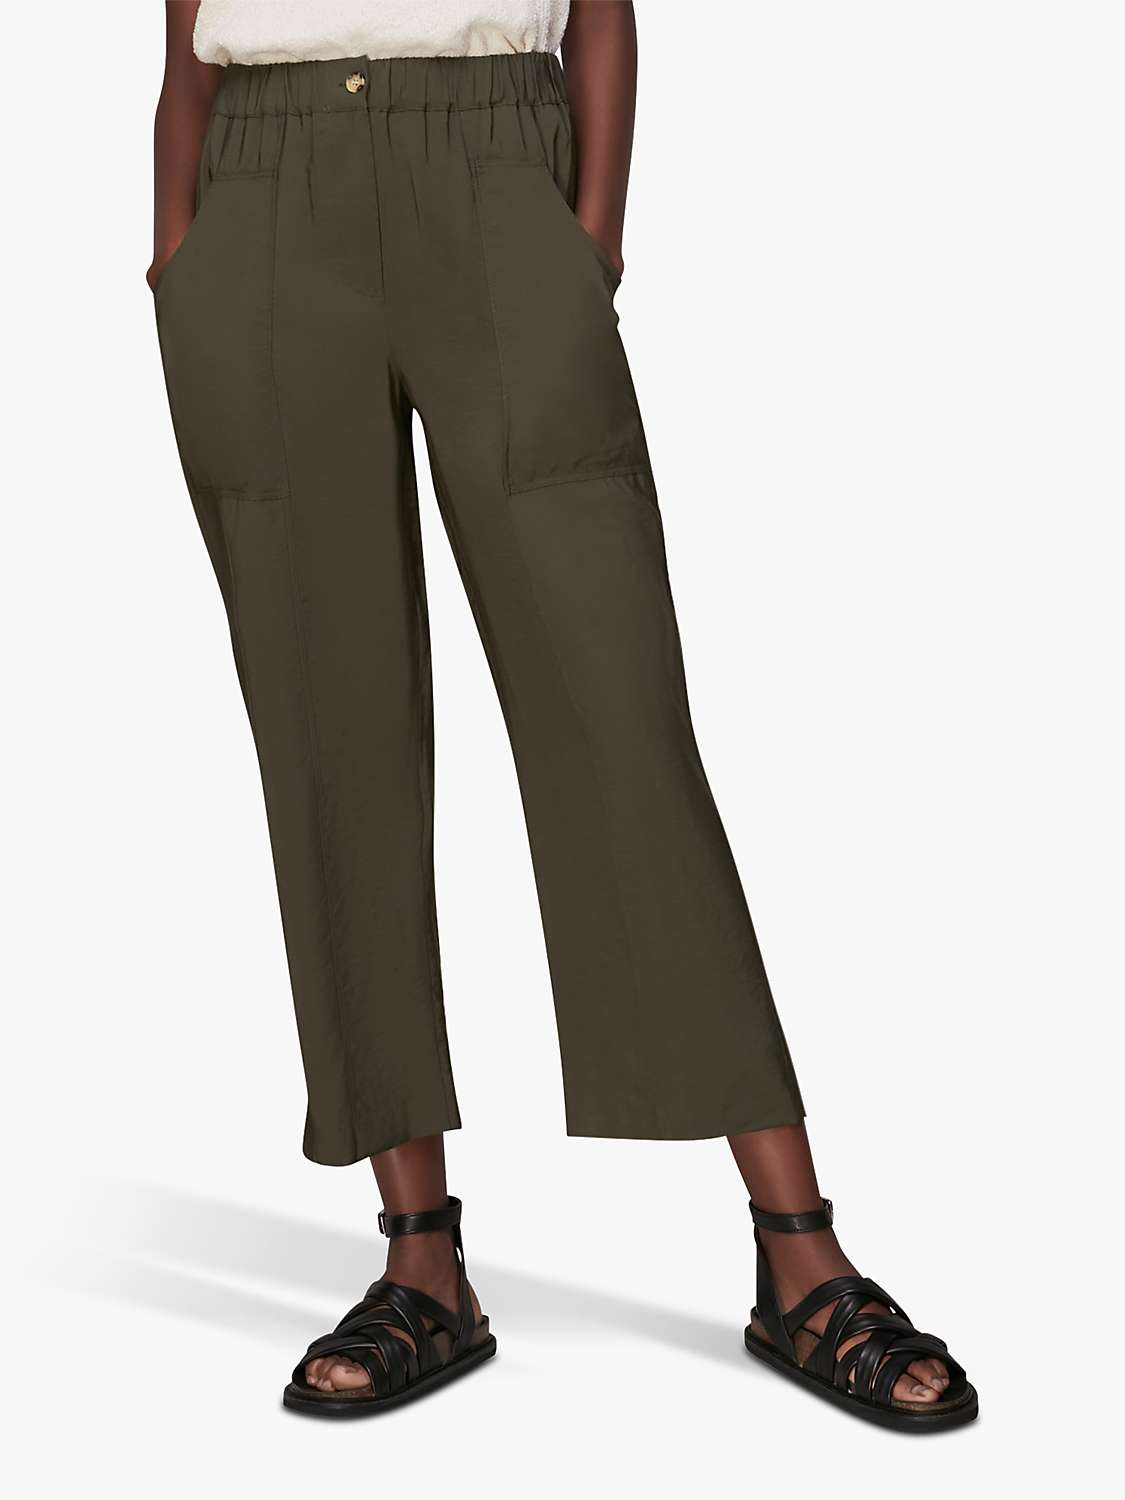 Buy Whistles Easy Casual Trousers, Khaki Online at johnlewis.com